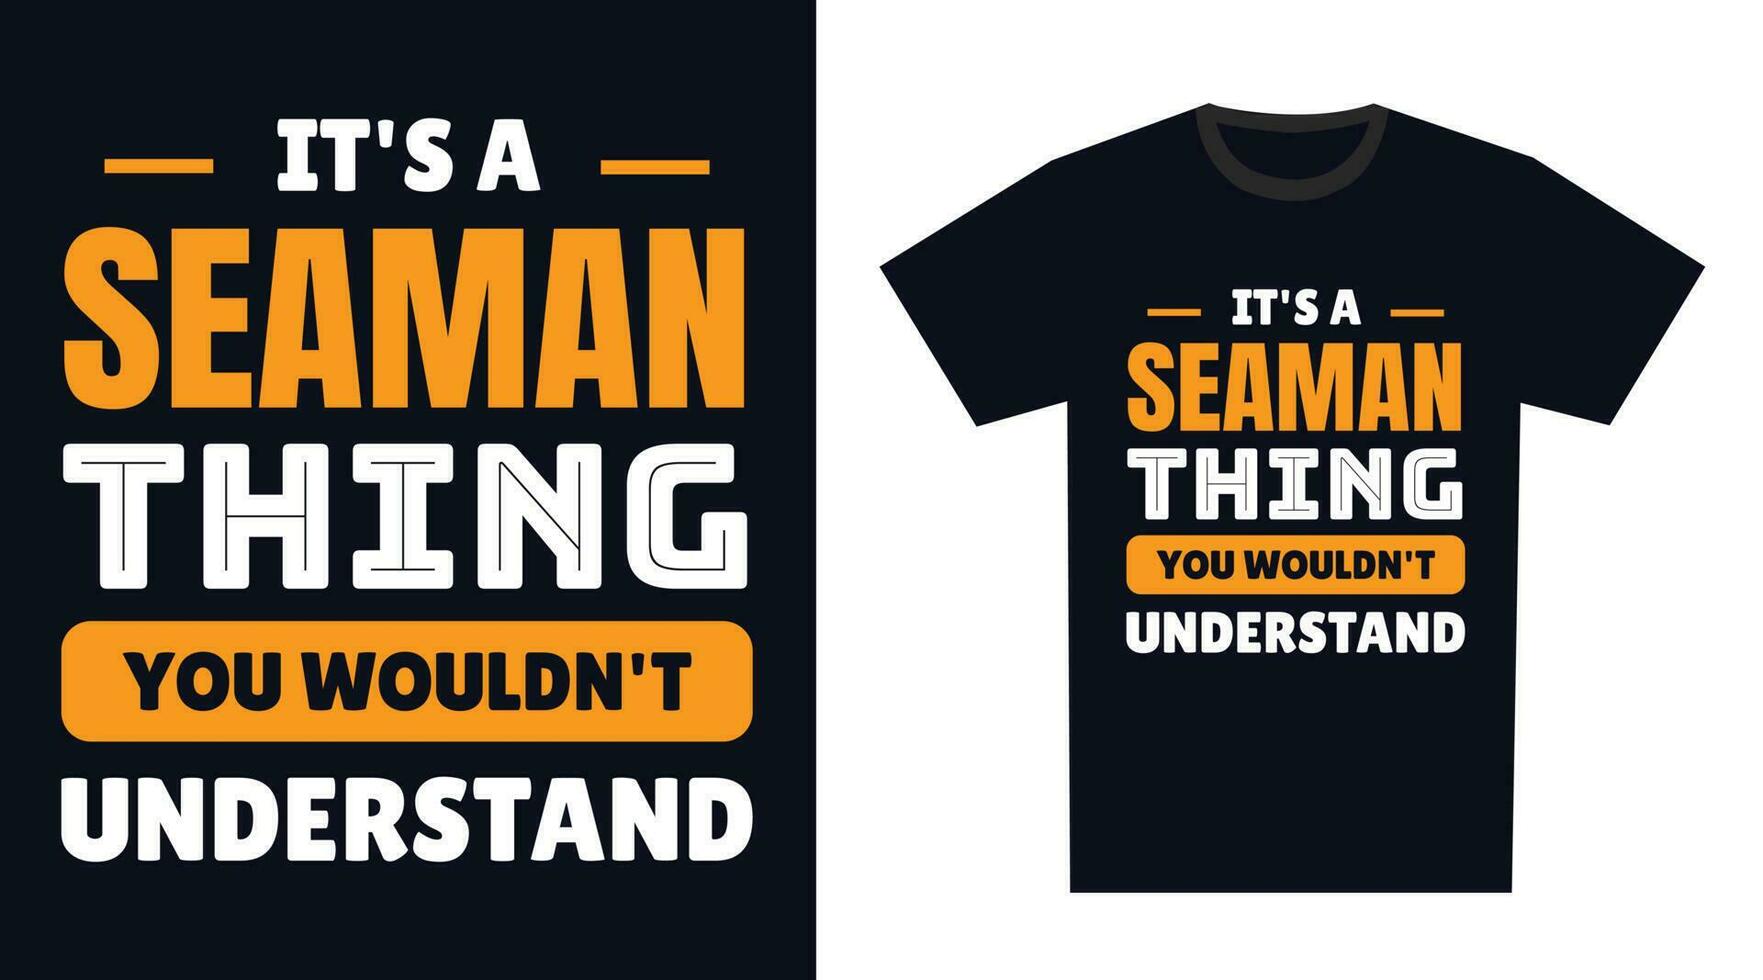 Seaman T Shirt Design. It's a Seaman Thing, You Wouldn't Understand vector